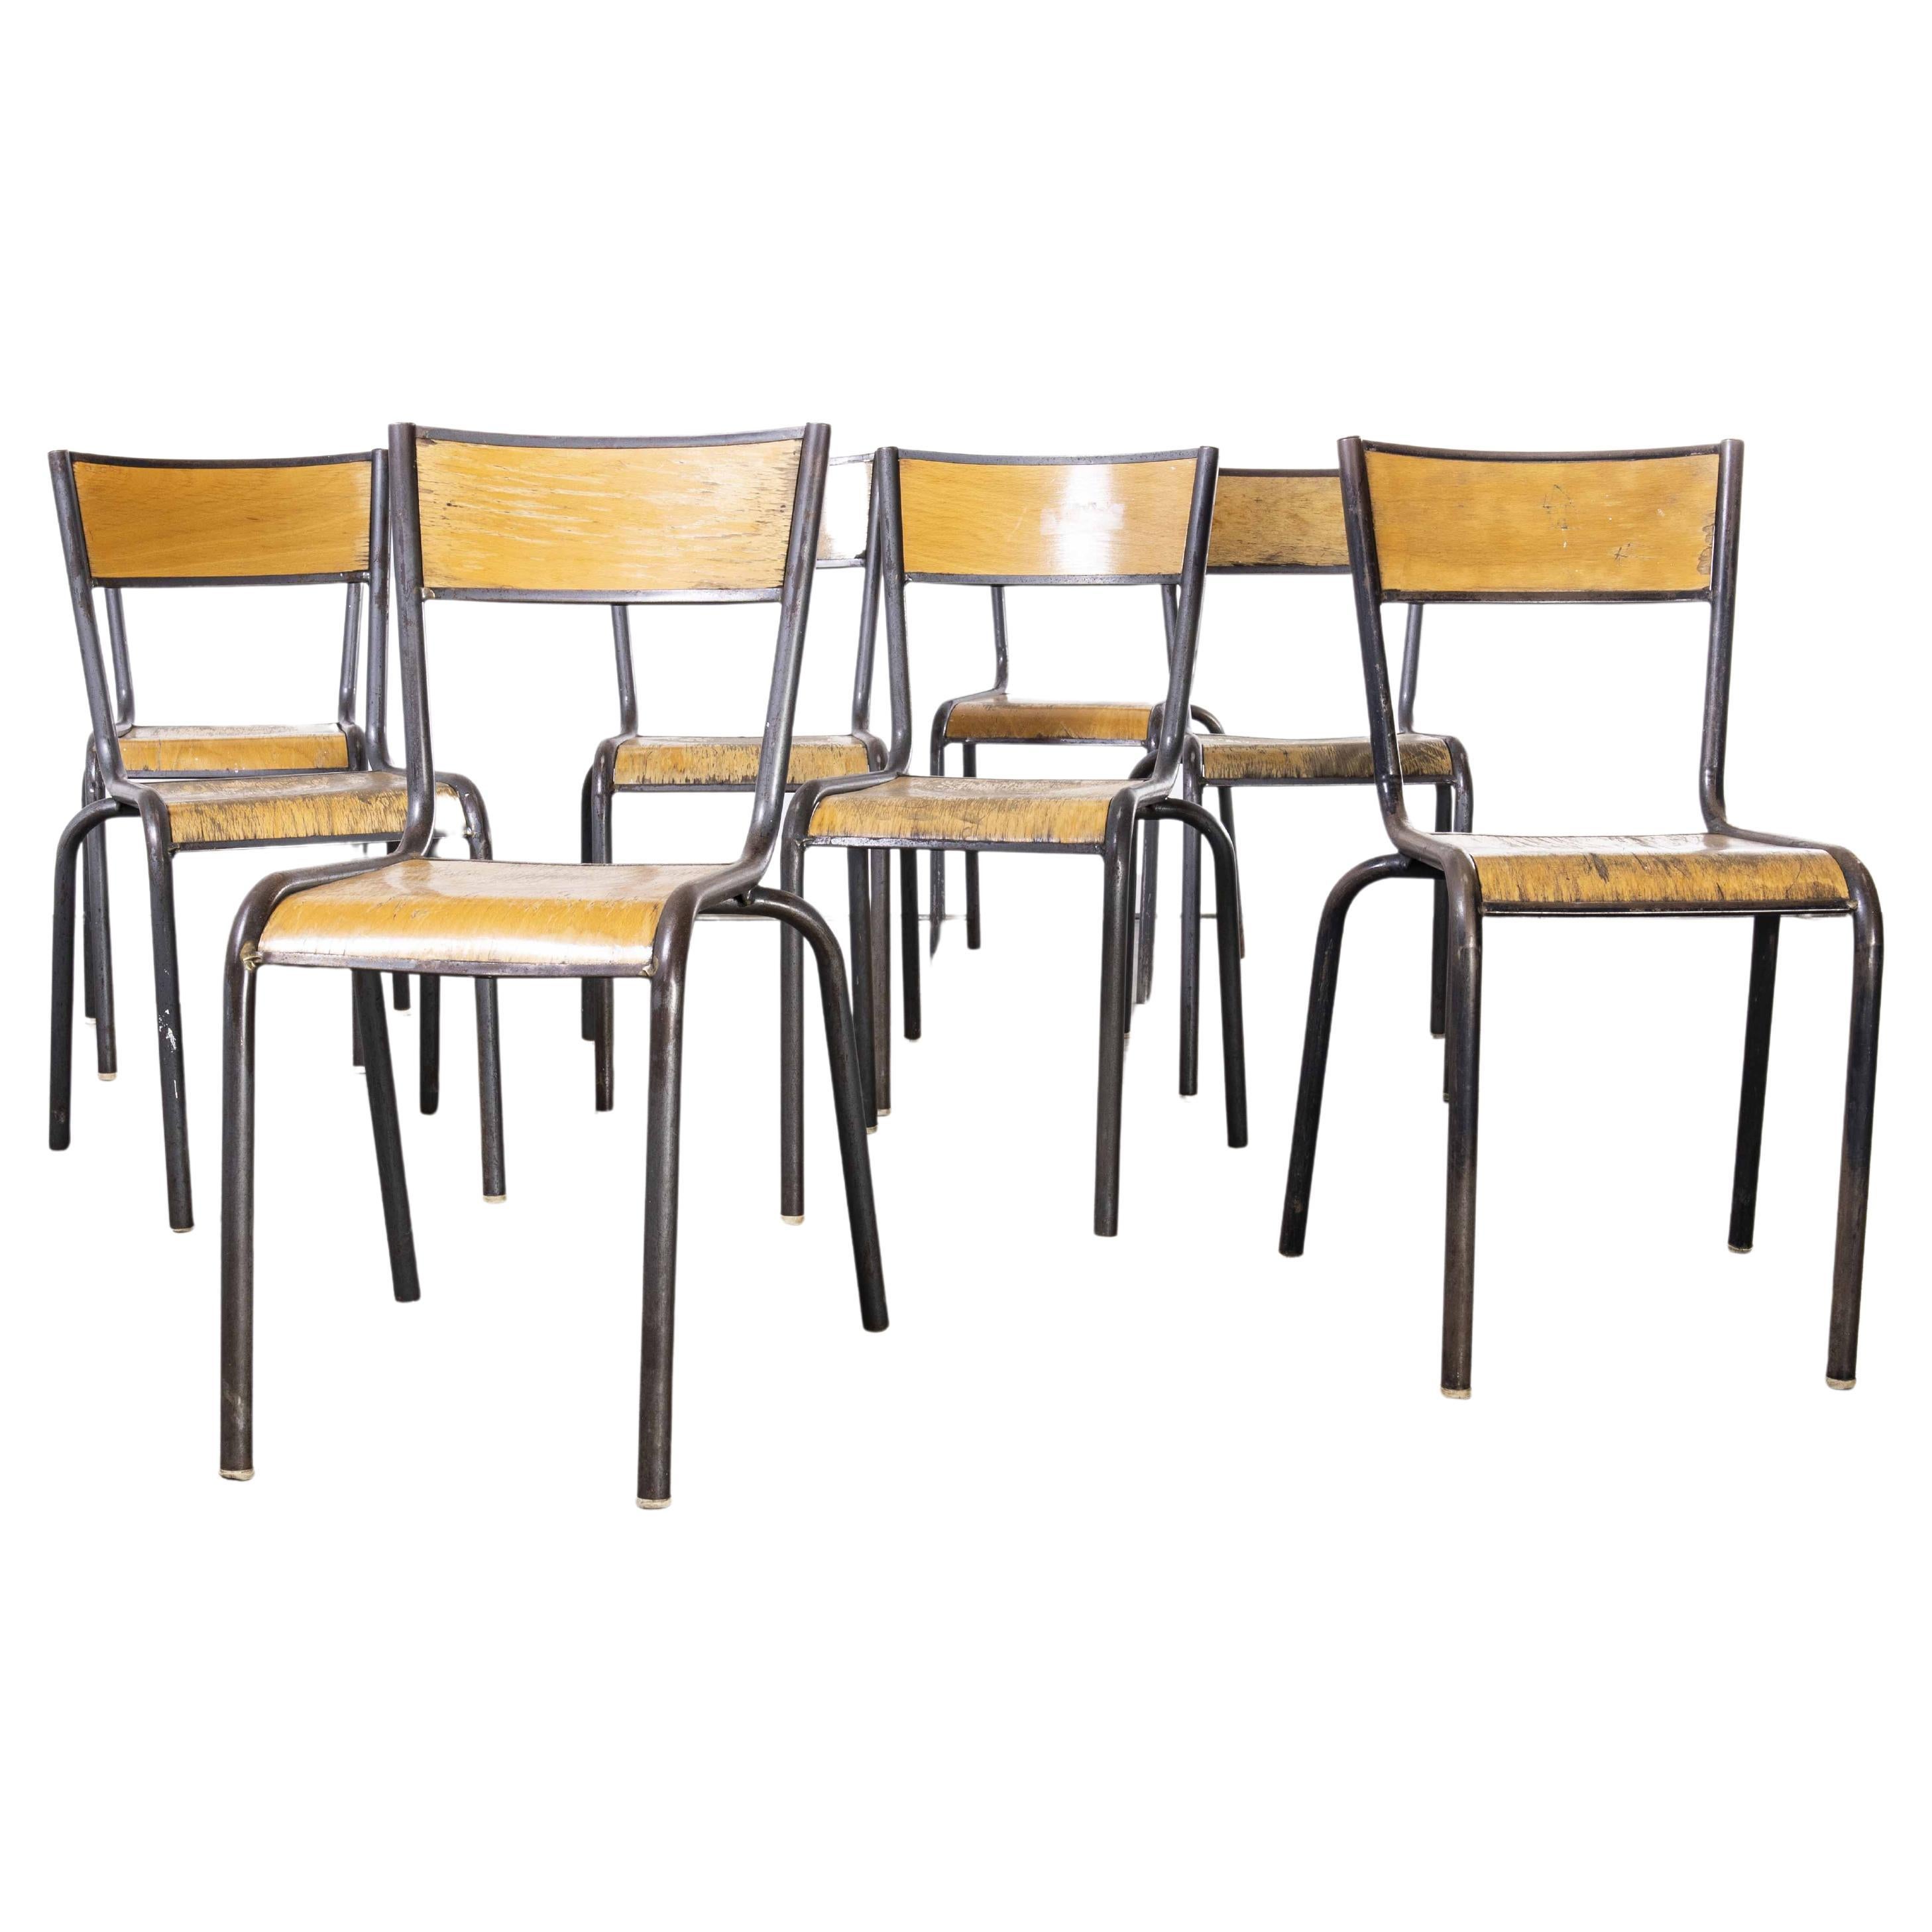 1960's French Mullca Stacking Chair 510, Graphite Frame, Set of Eight For Sale